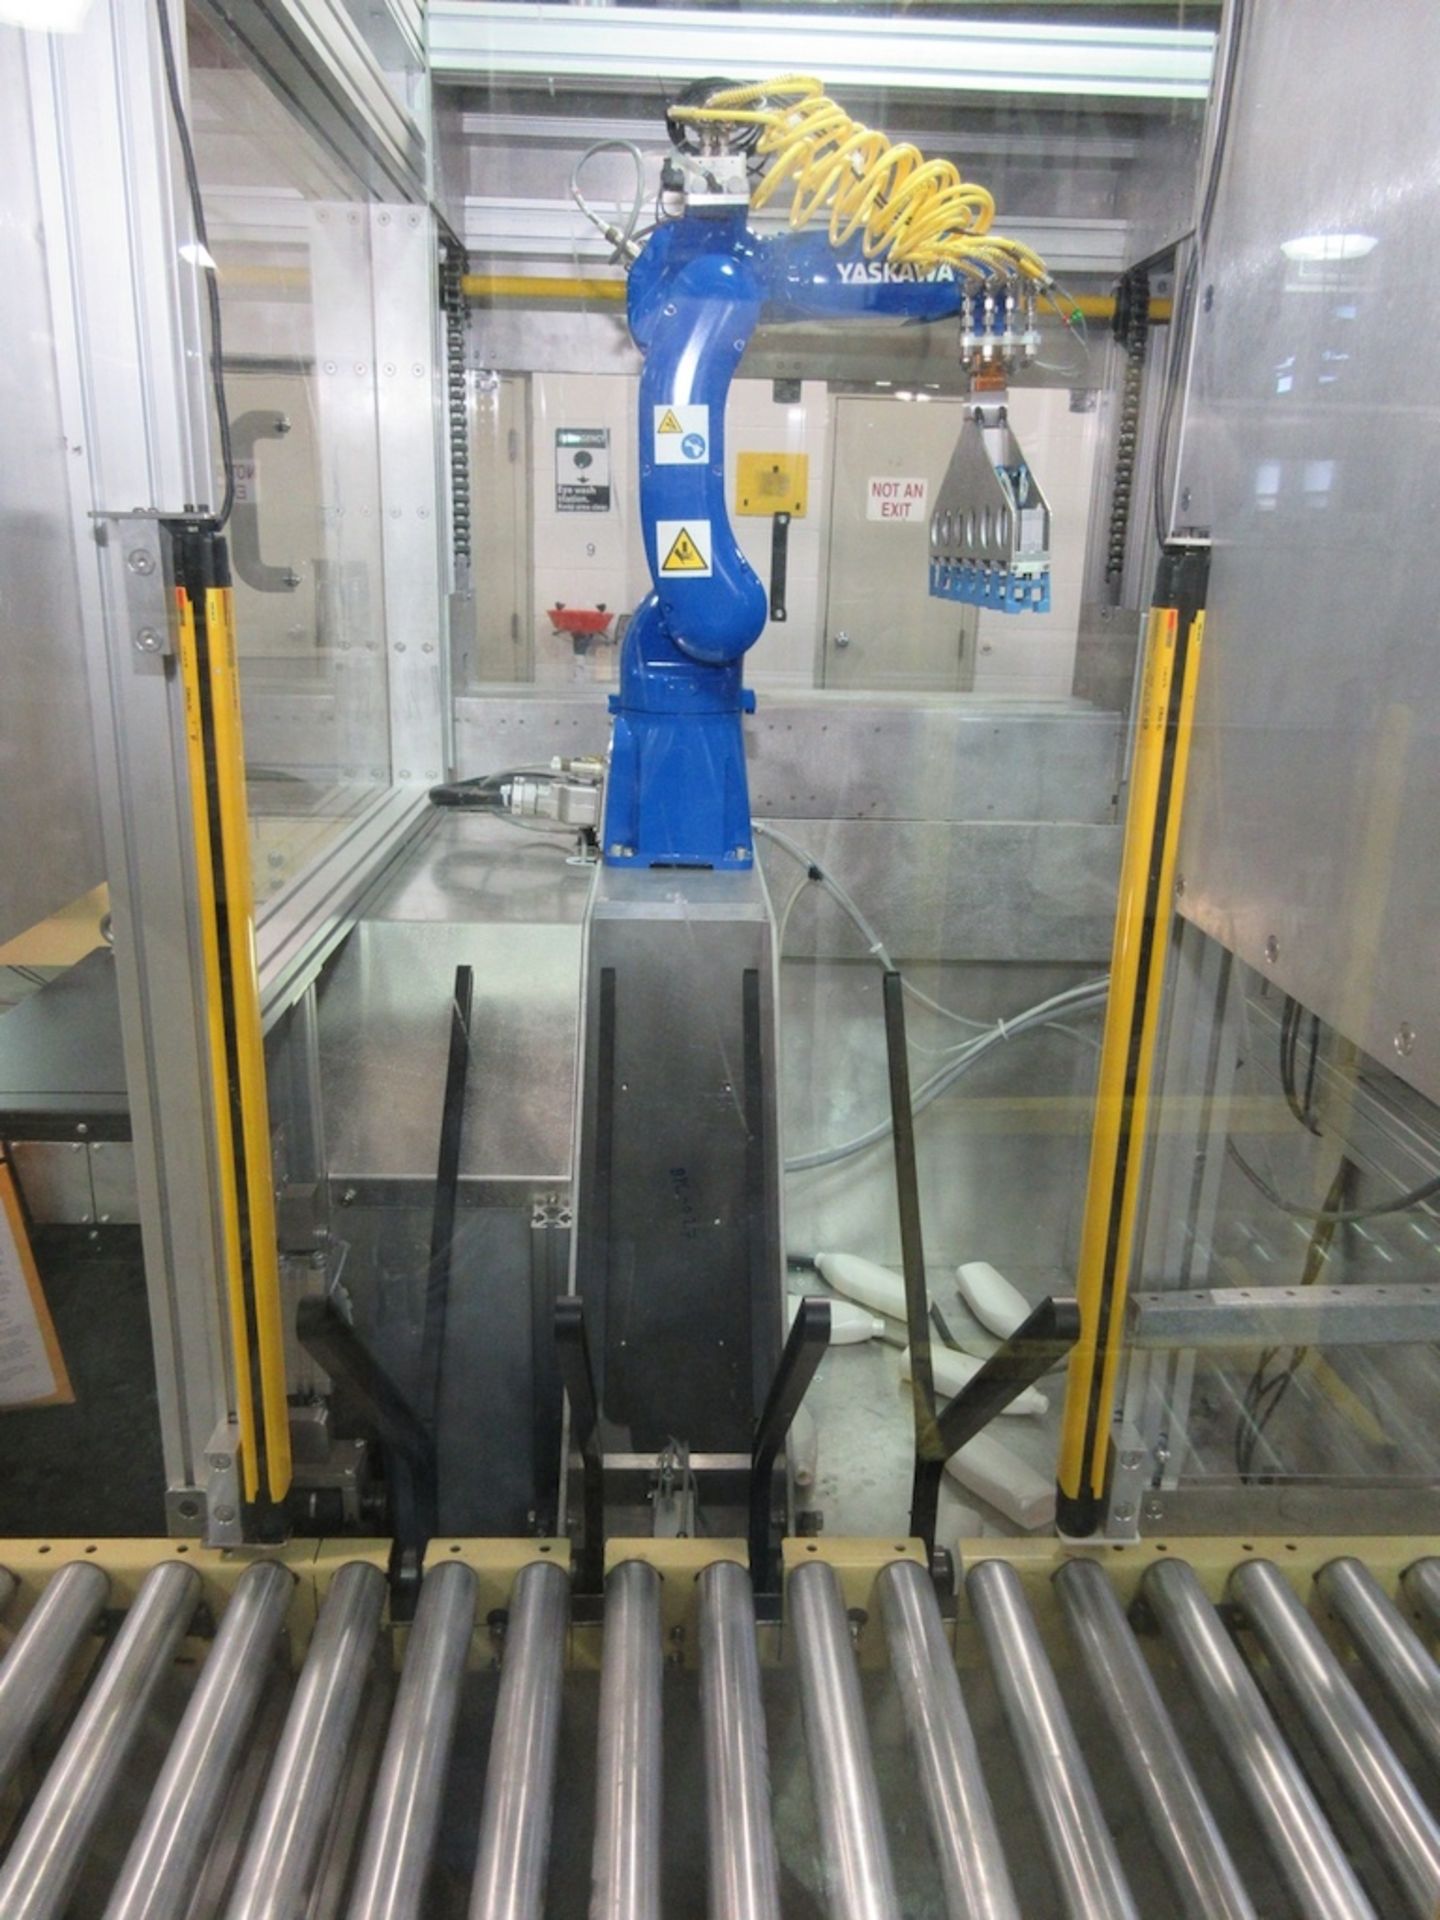 Yaskawa YR-1-06VX8-A00 Bottle Packing Robot System w/Conveyors, New in 2021 - Image 8 of 14